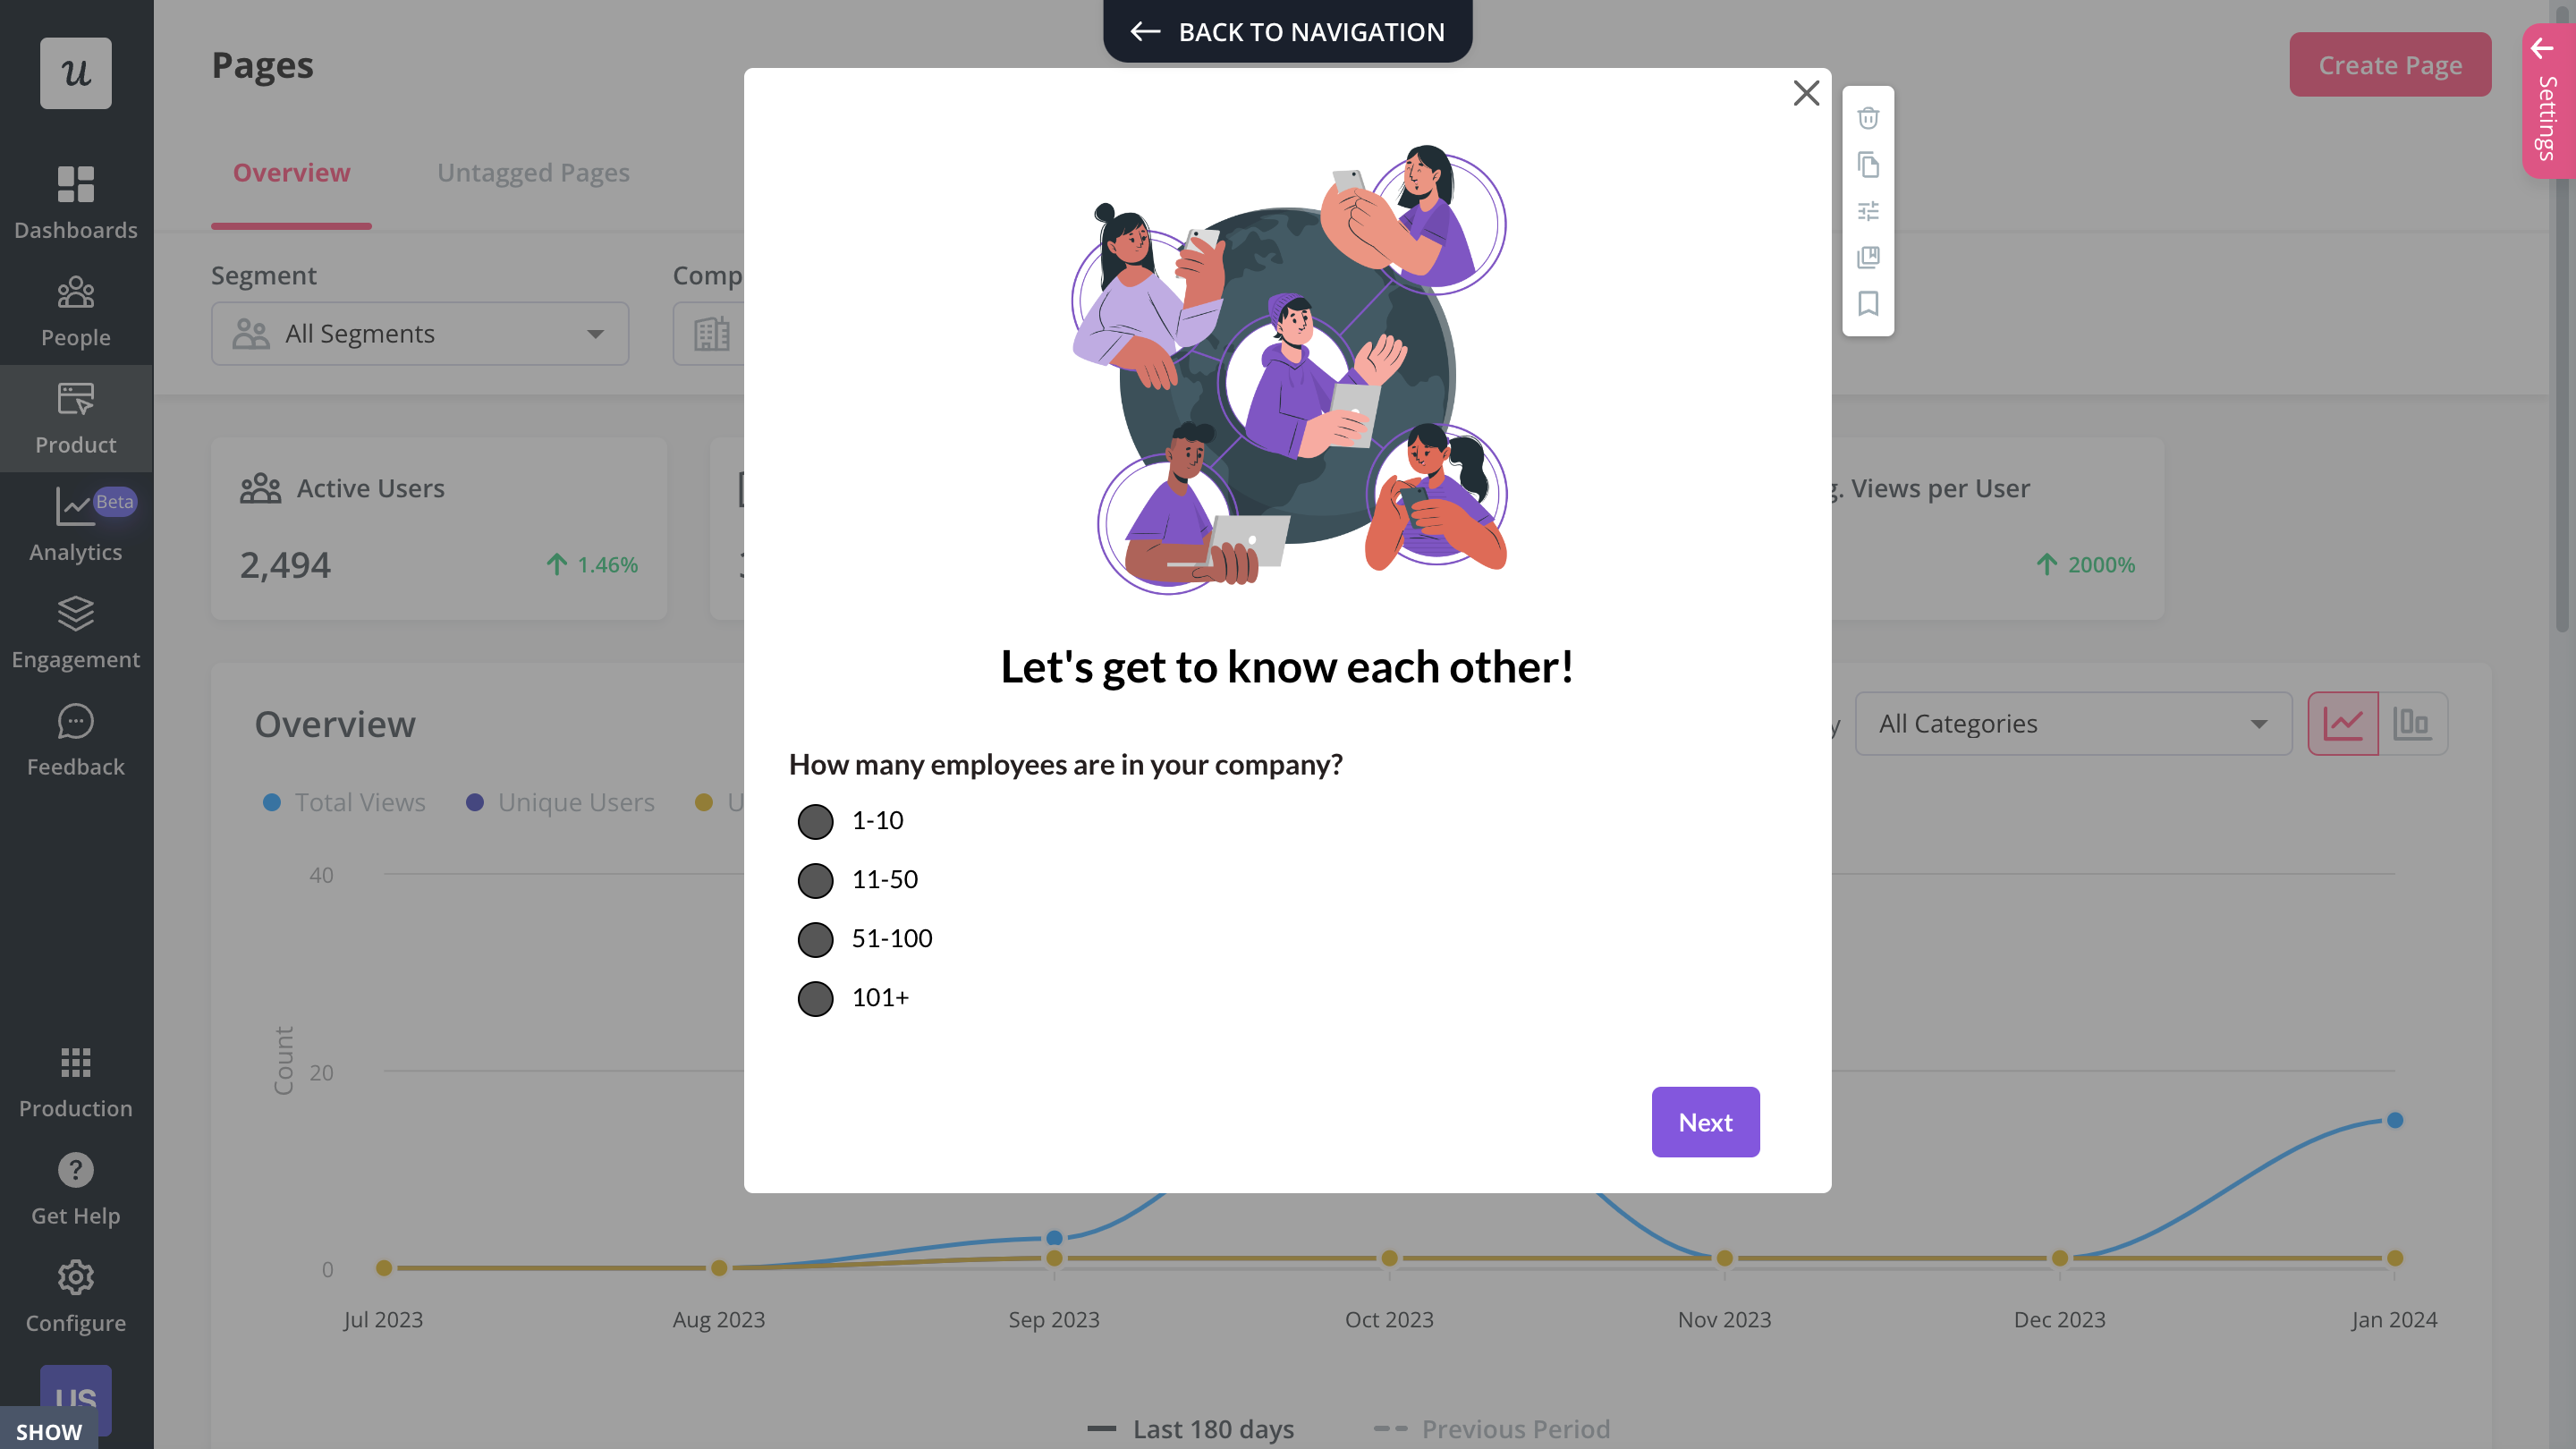 Capture insights about your users from the very first stage with a welcome survey.